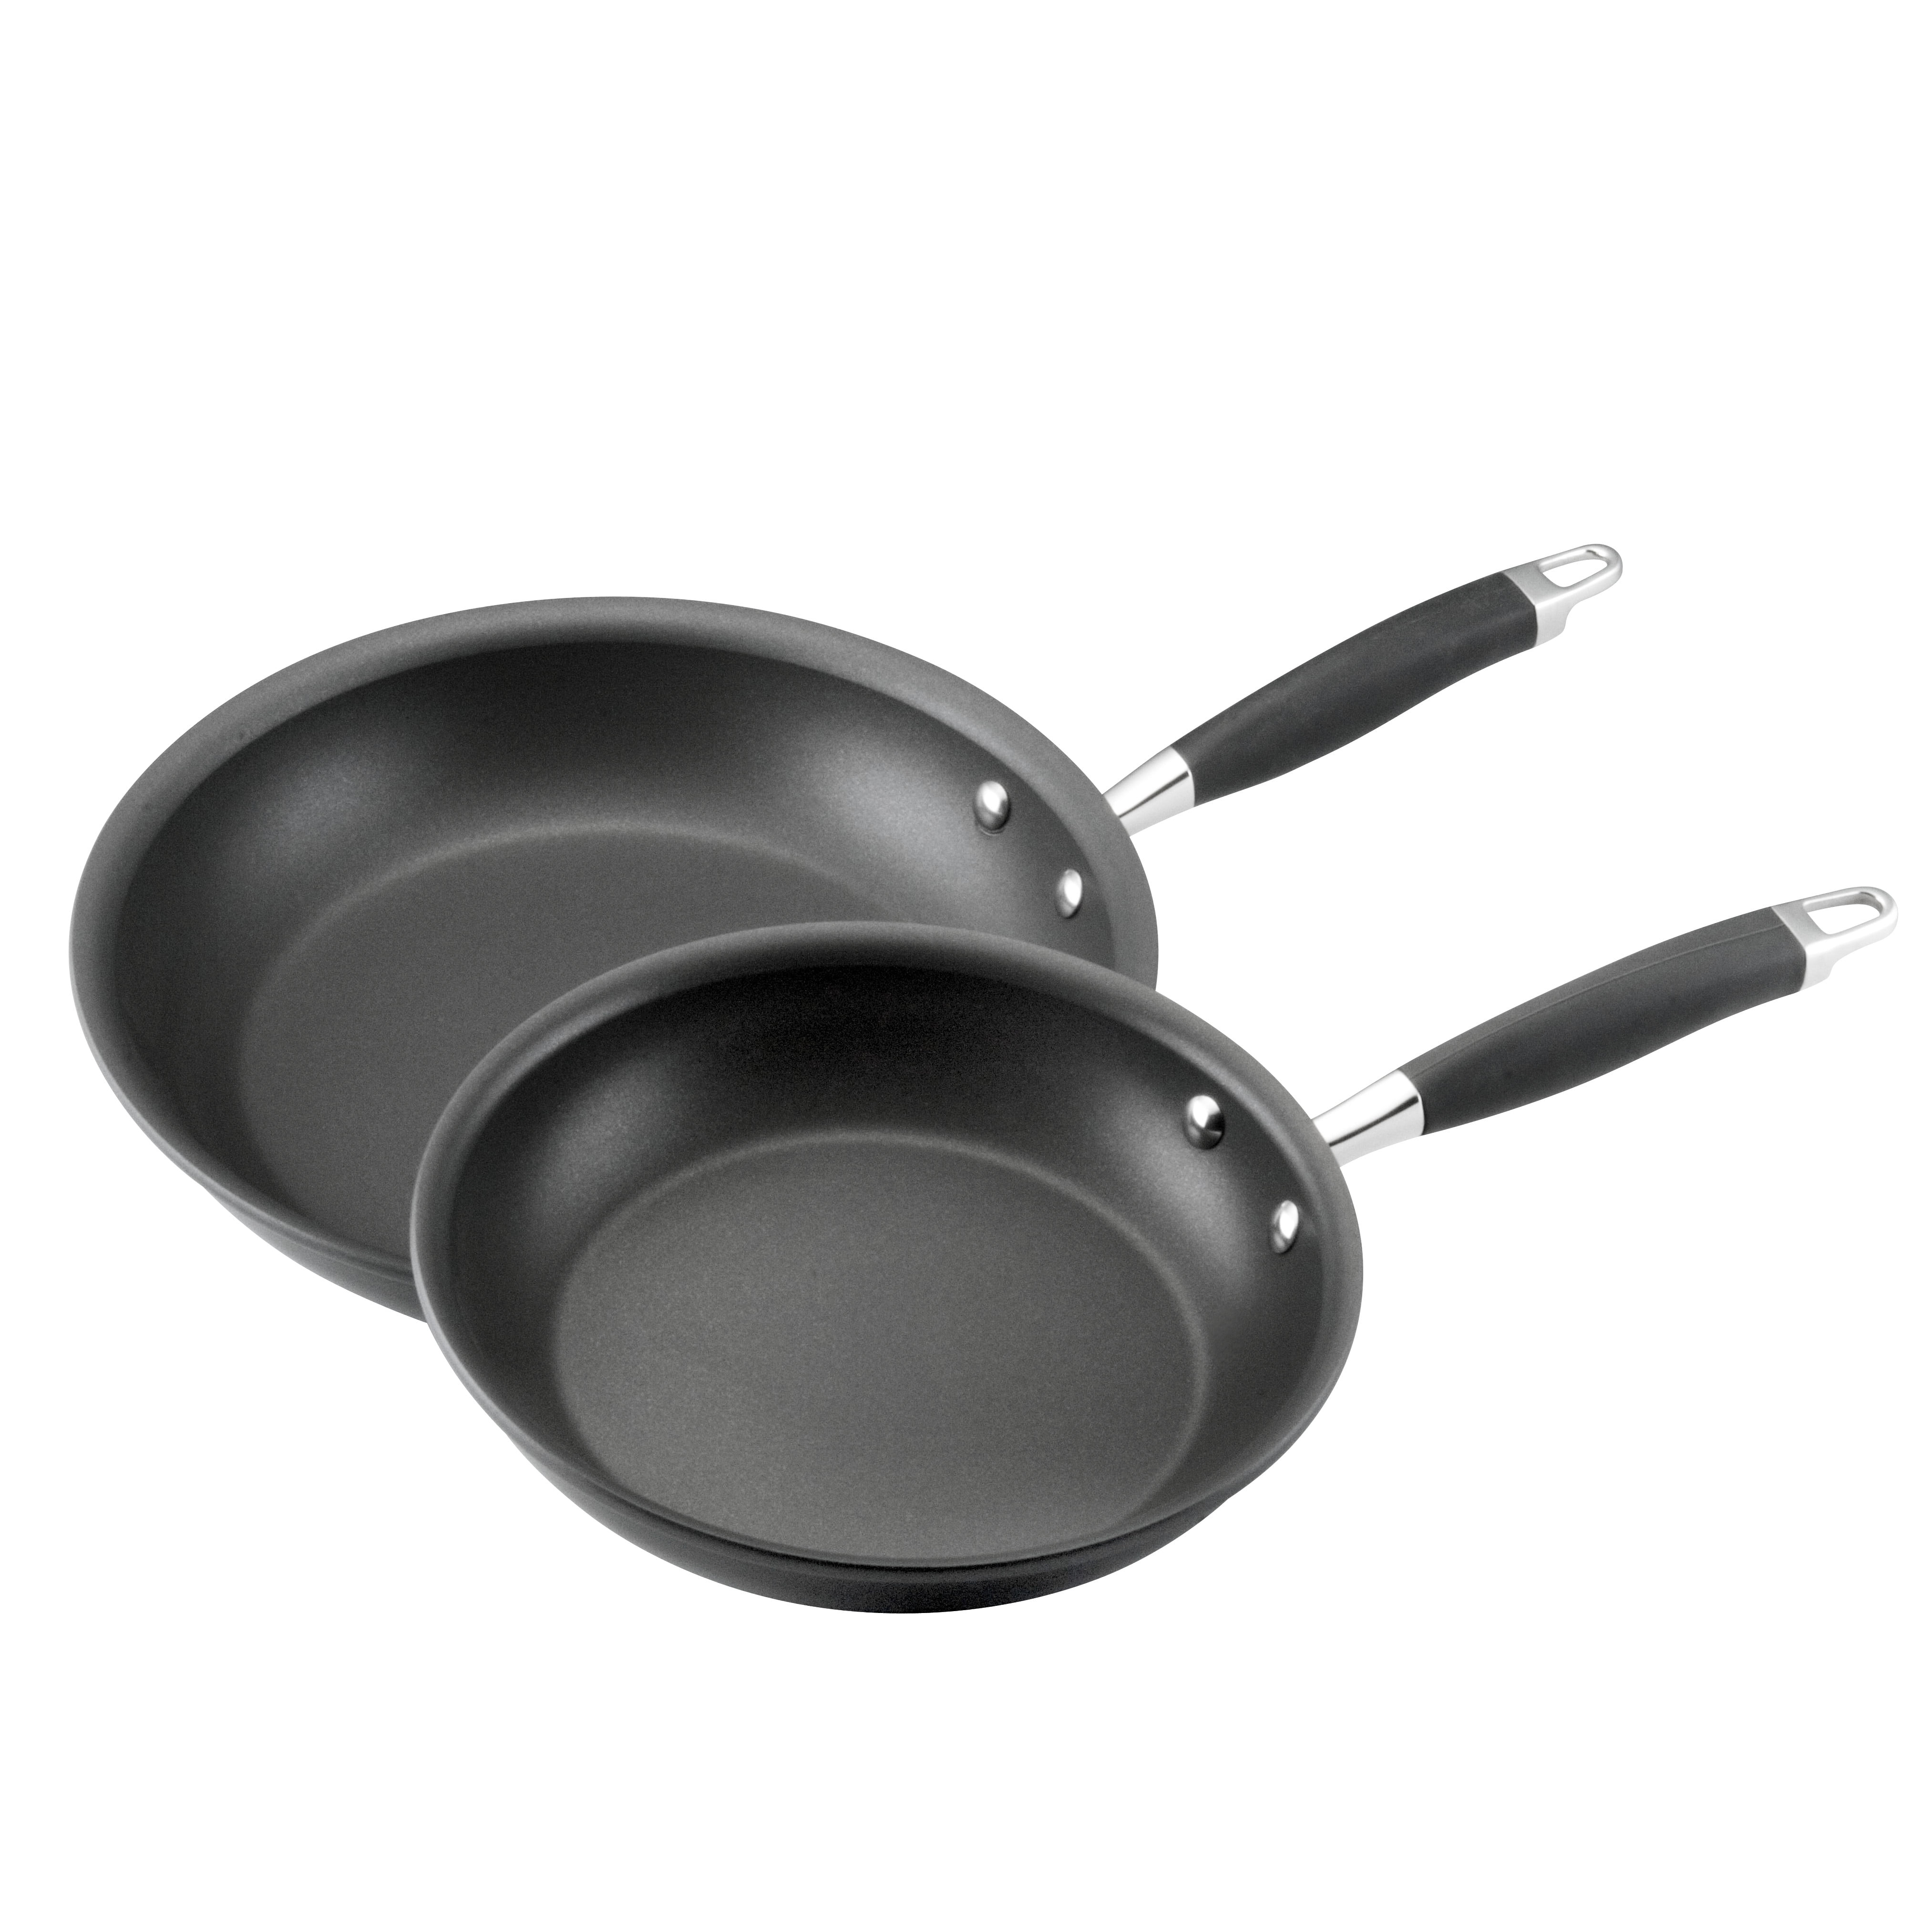 Black Anolon Smart Stack Hard Anodized Nonstick Frying Pan Set Hard Anodized Skillet Set 10 Inch and 12 Inch Fry Pan Set 